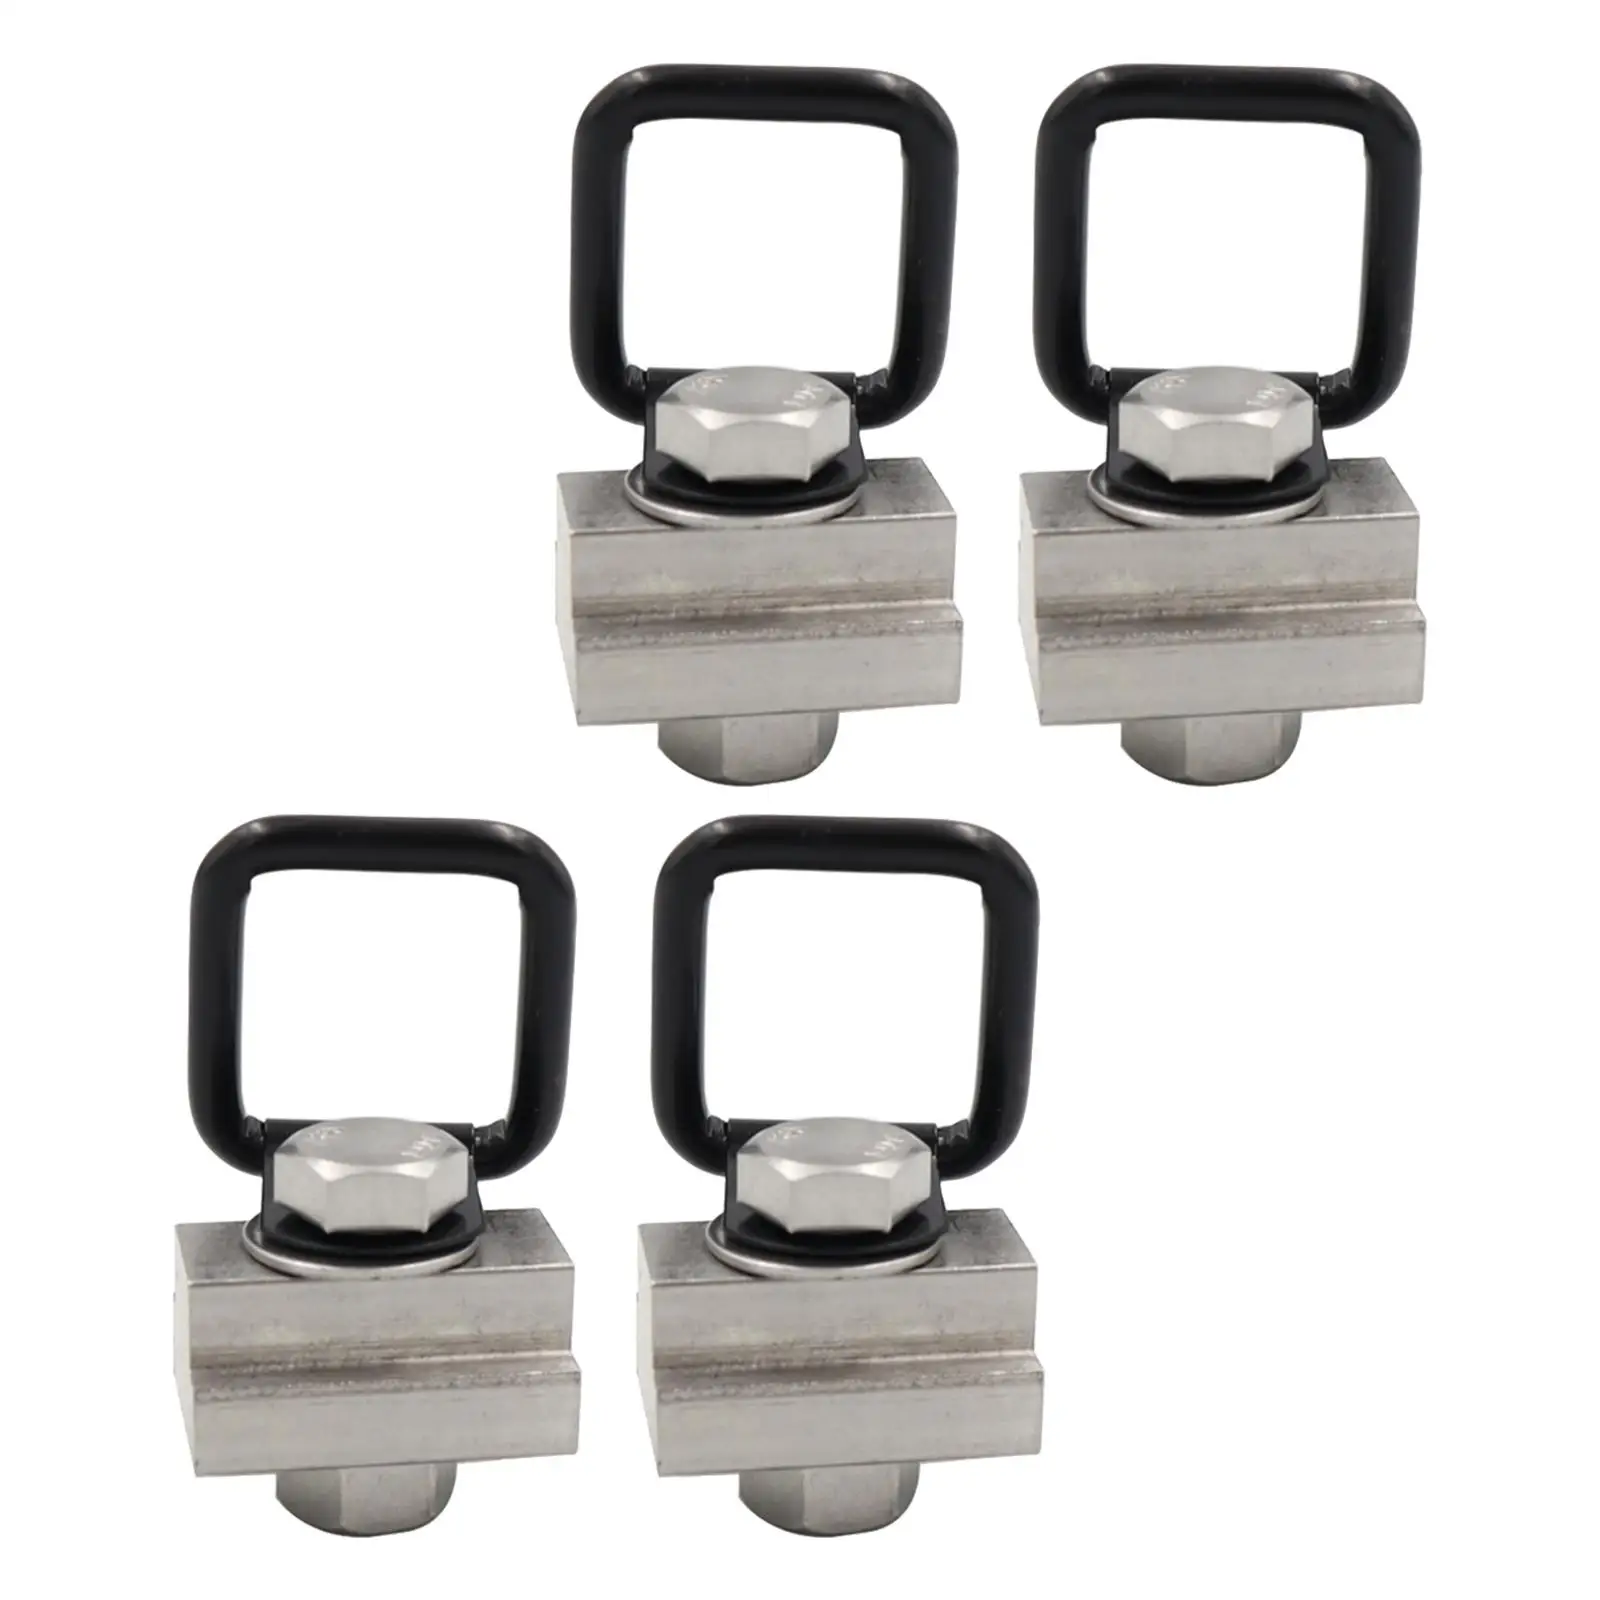 

4 Pieces Car Bed Rail T Slot Nuts Kit Fits 3/8" Screw for Toyota for tacoma